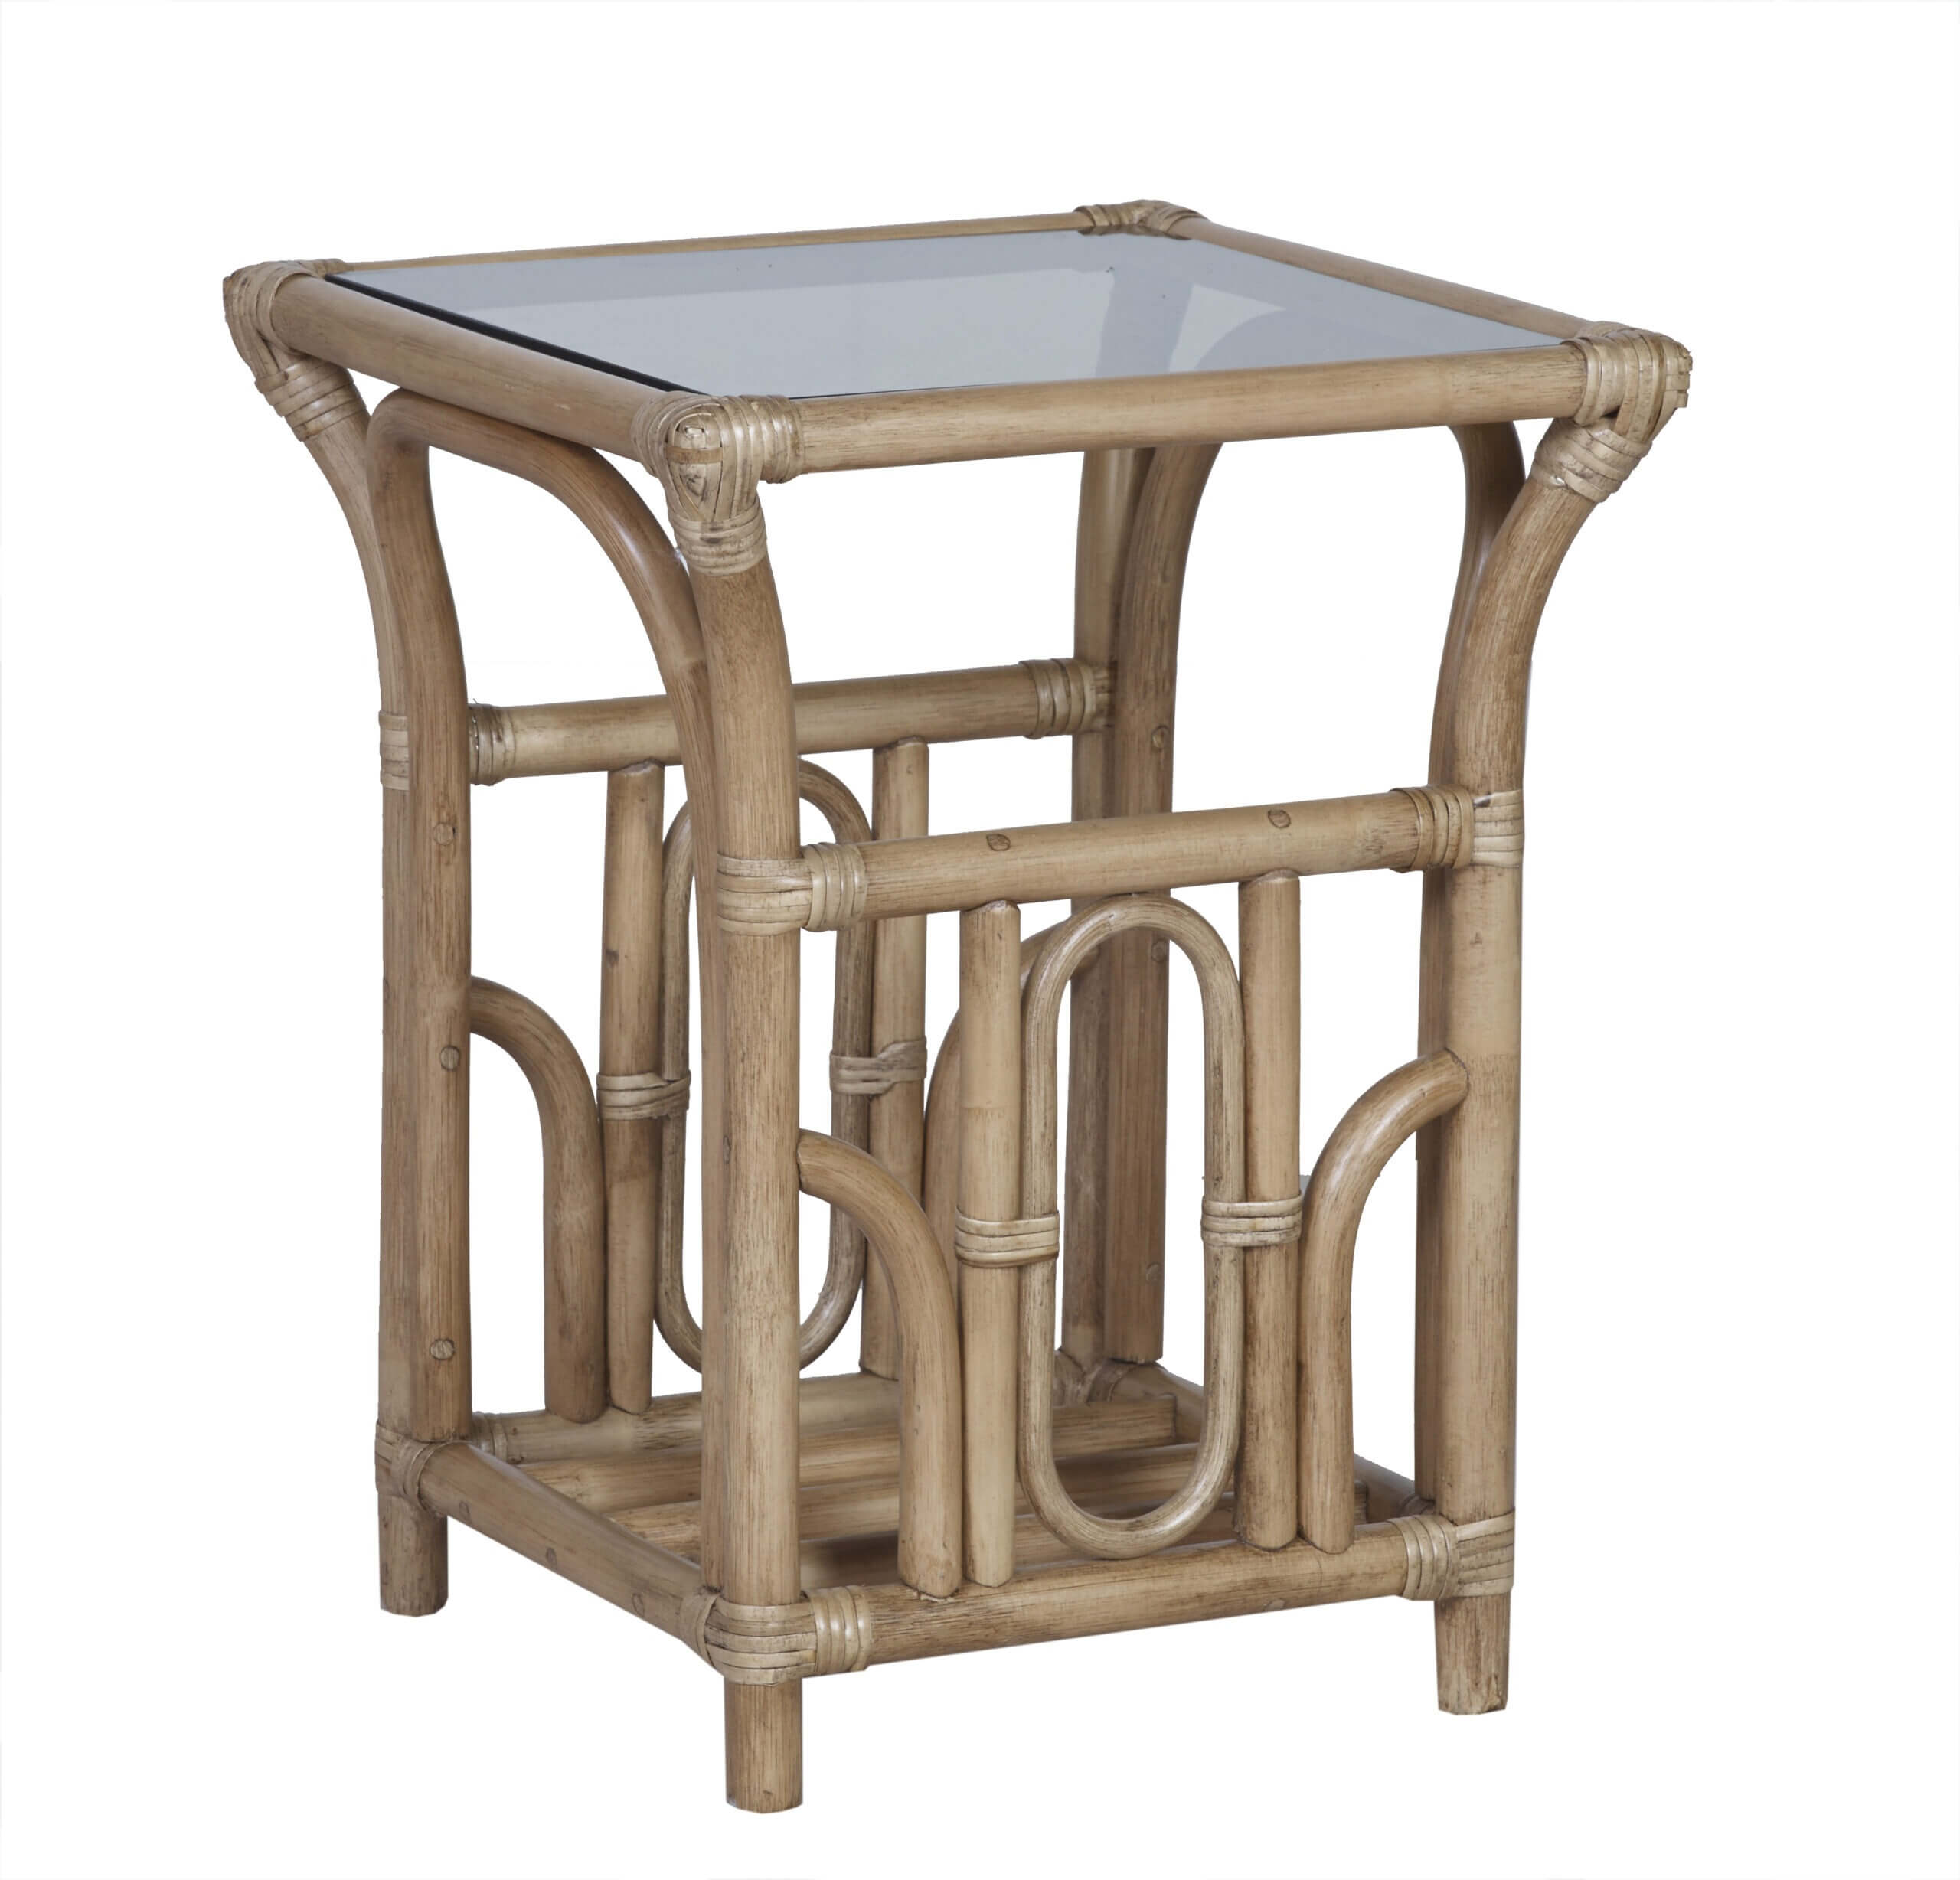 Showing image for Pesaro side table